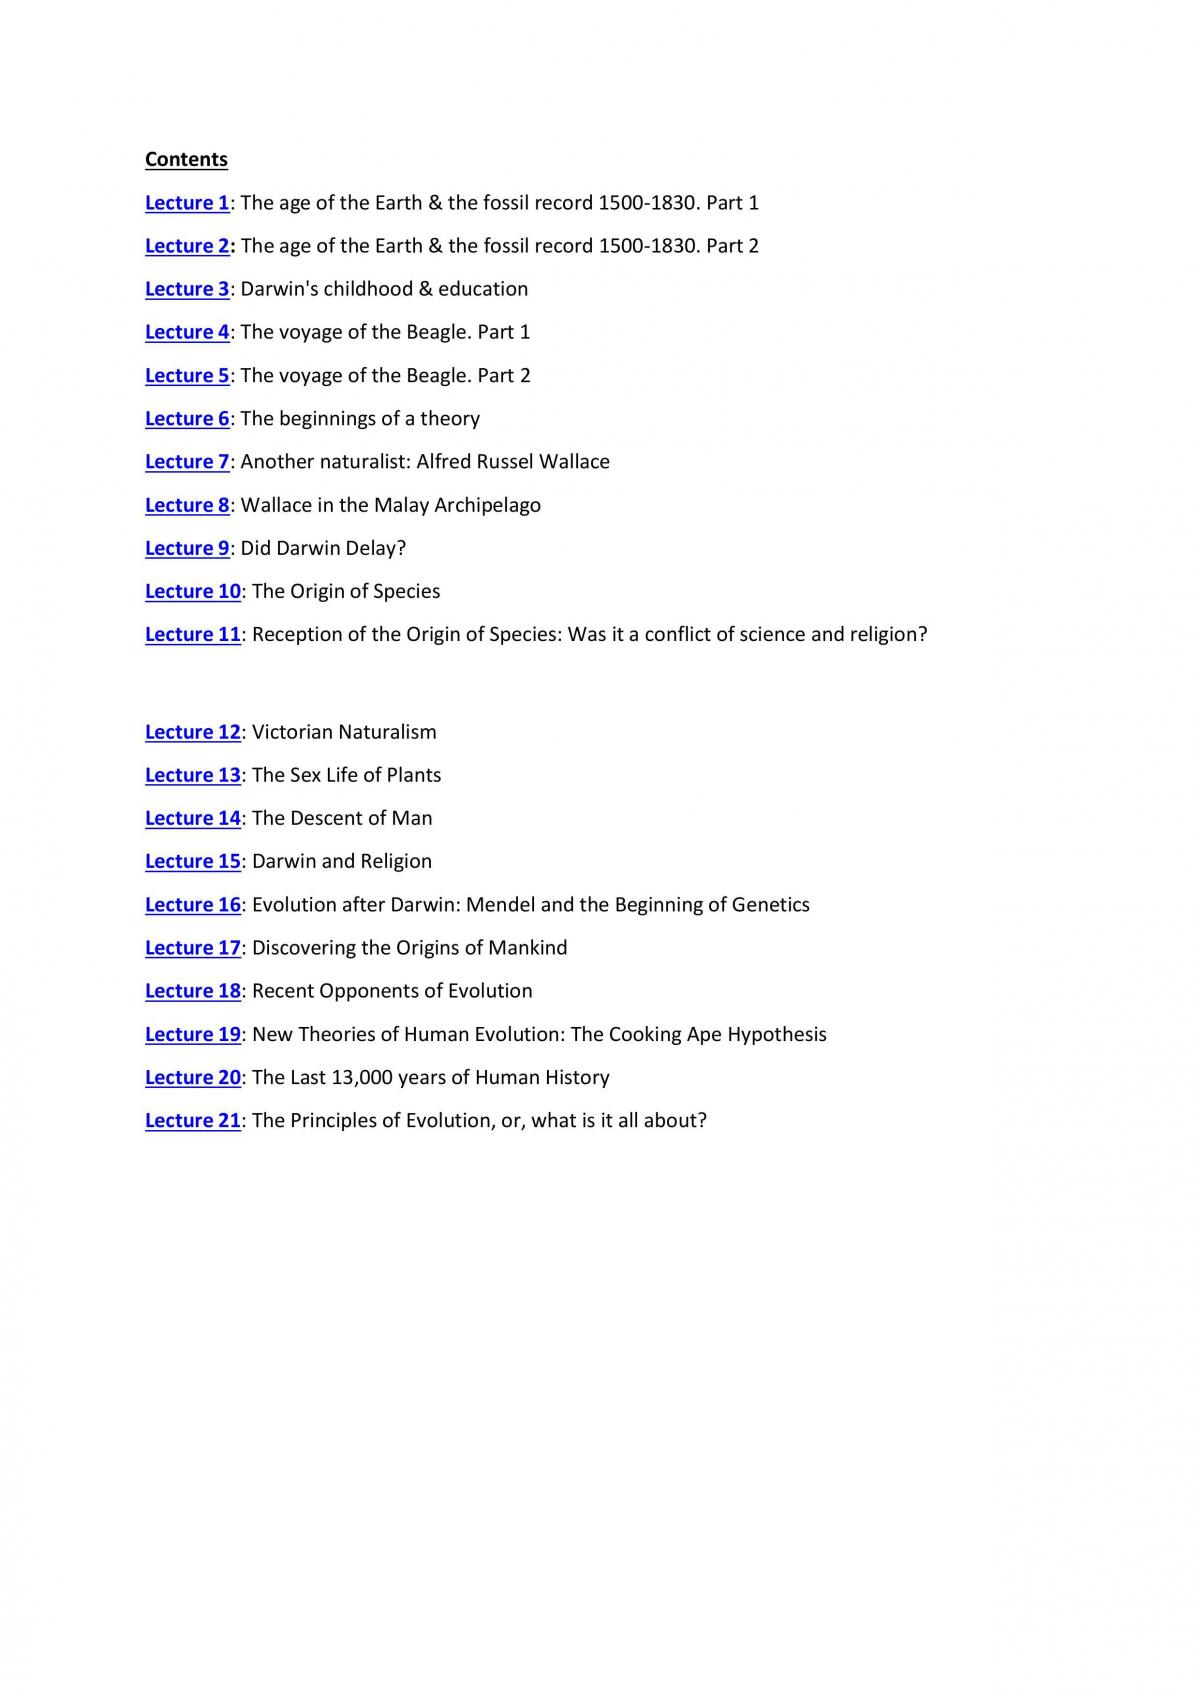 GET1020 compiled notes - Page 1